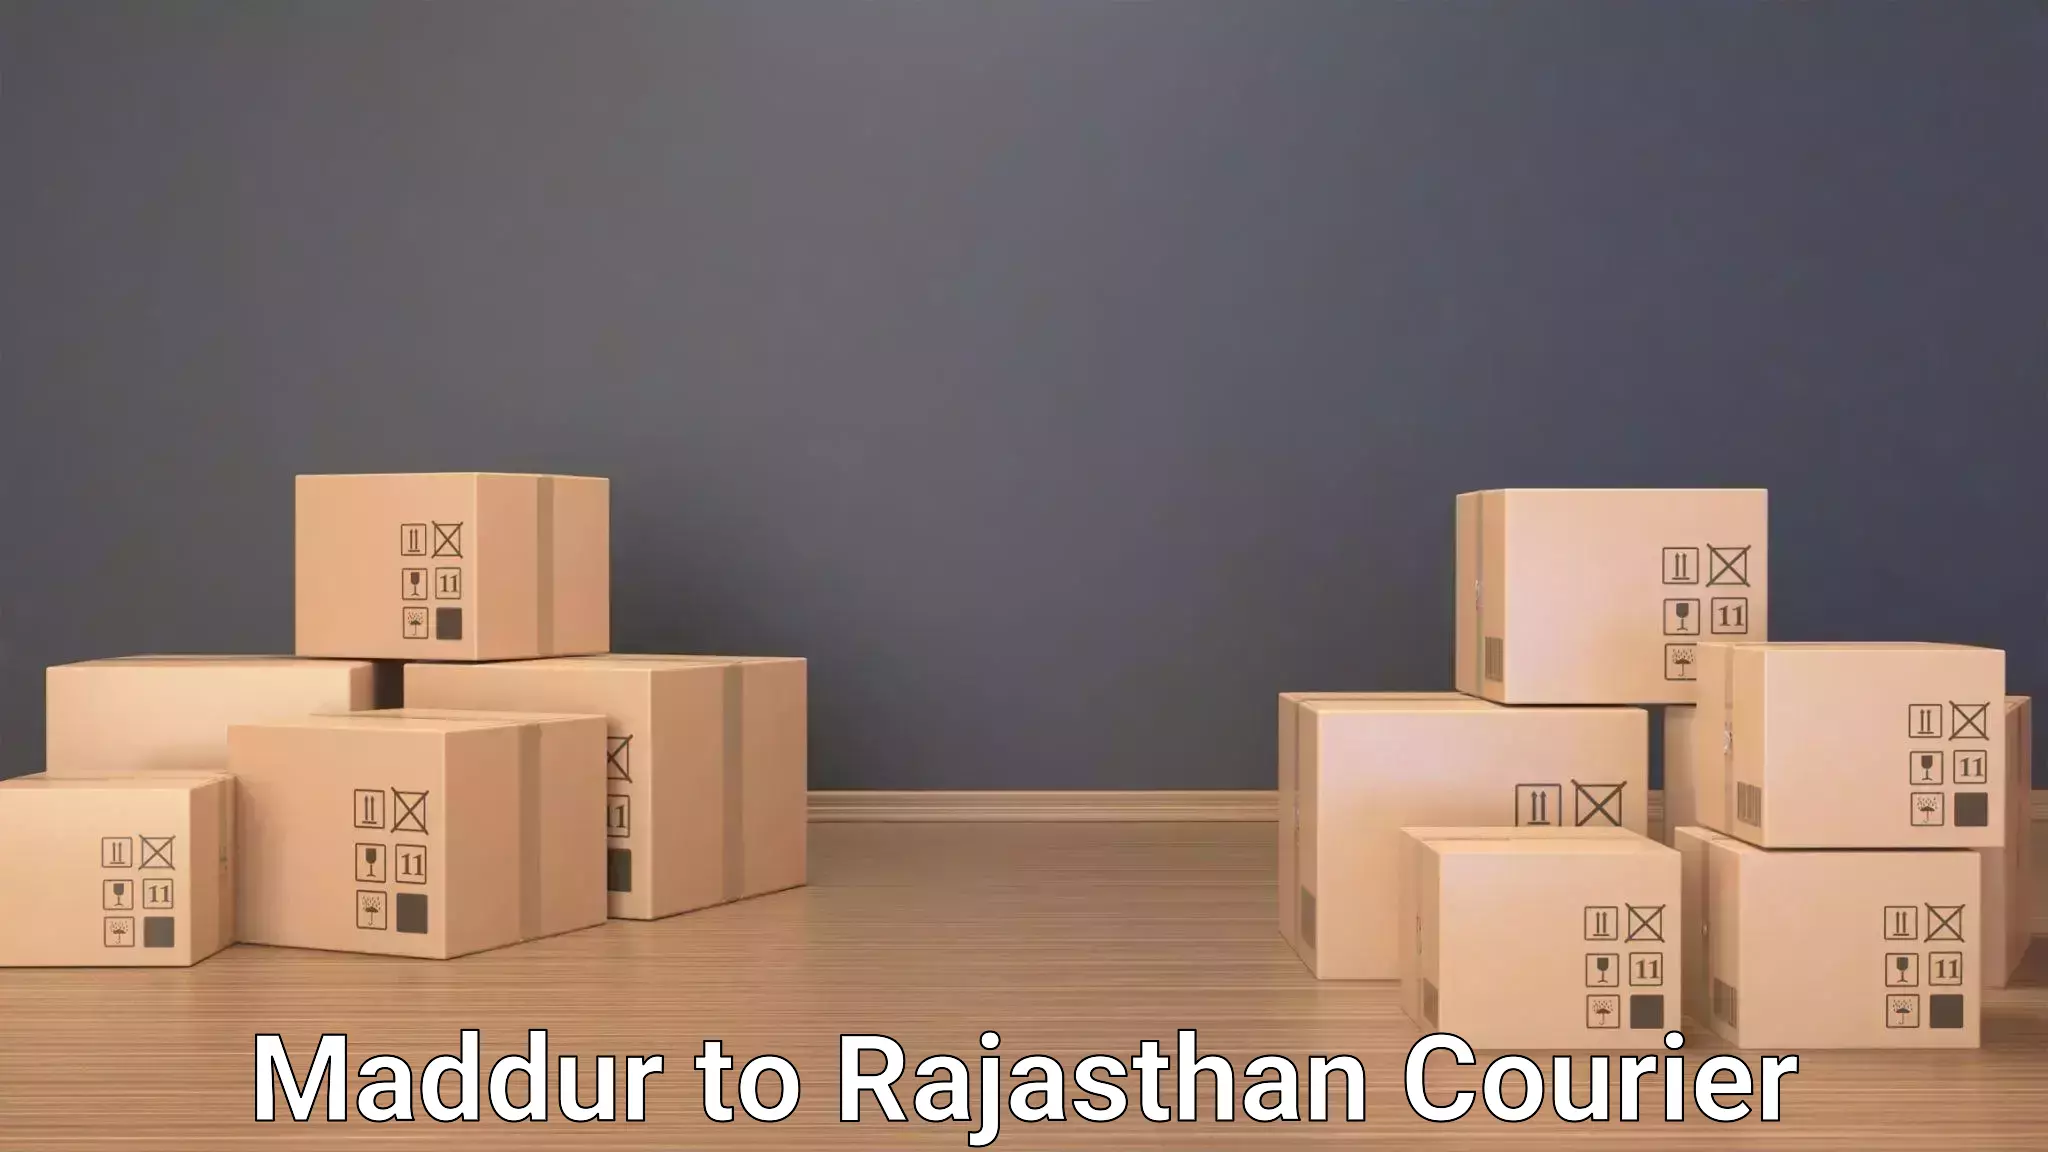 Luggage delivery optimization in Maddur to Laxmangarh